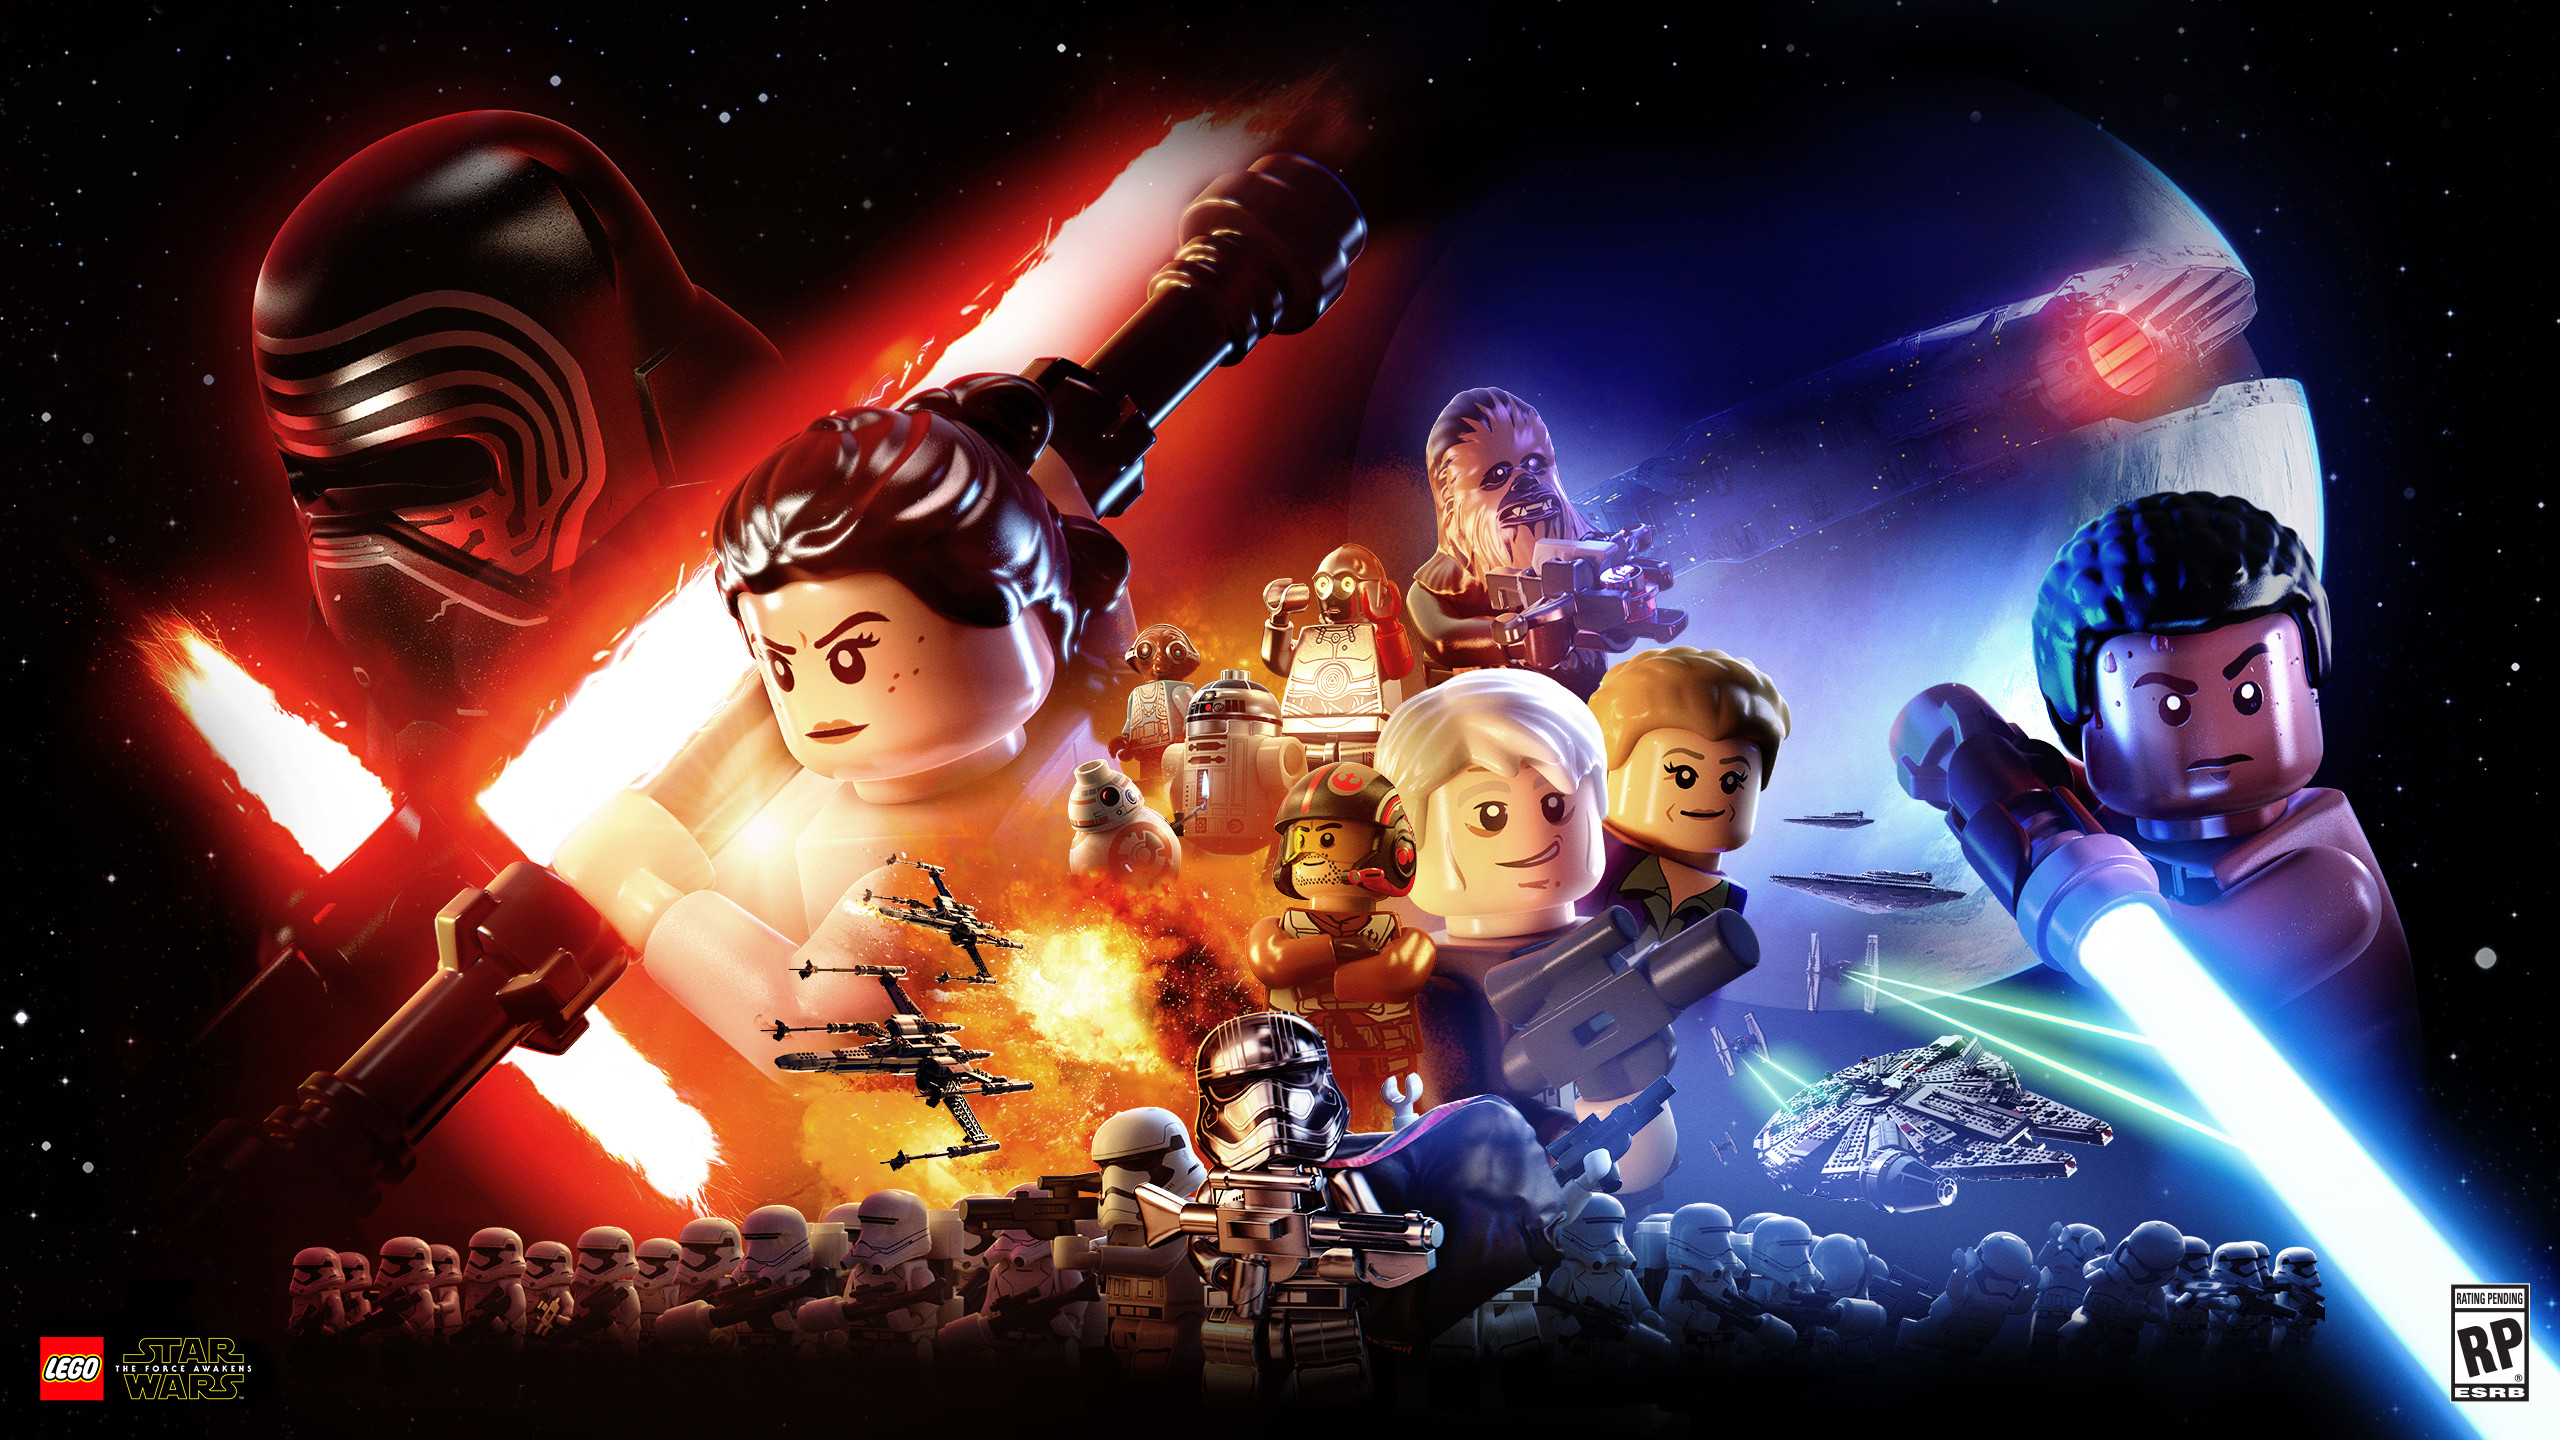 2560x1440 LEGO Star Wars: The Force Awakens Video Game - Standard Edition. LEGO Star  Wars: The Force Awakens - Video game wallpaper